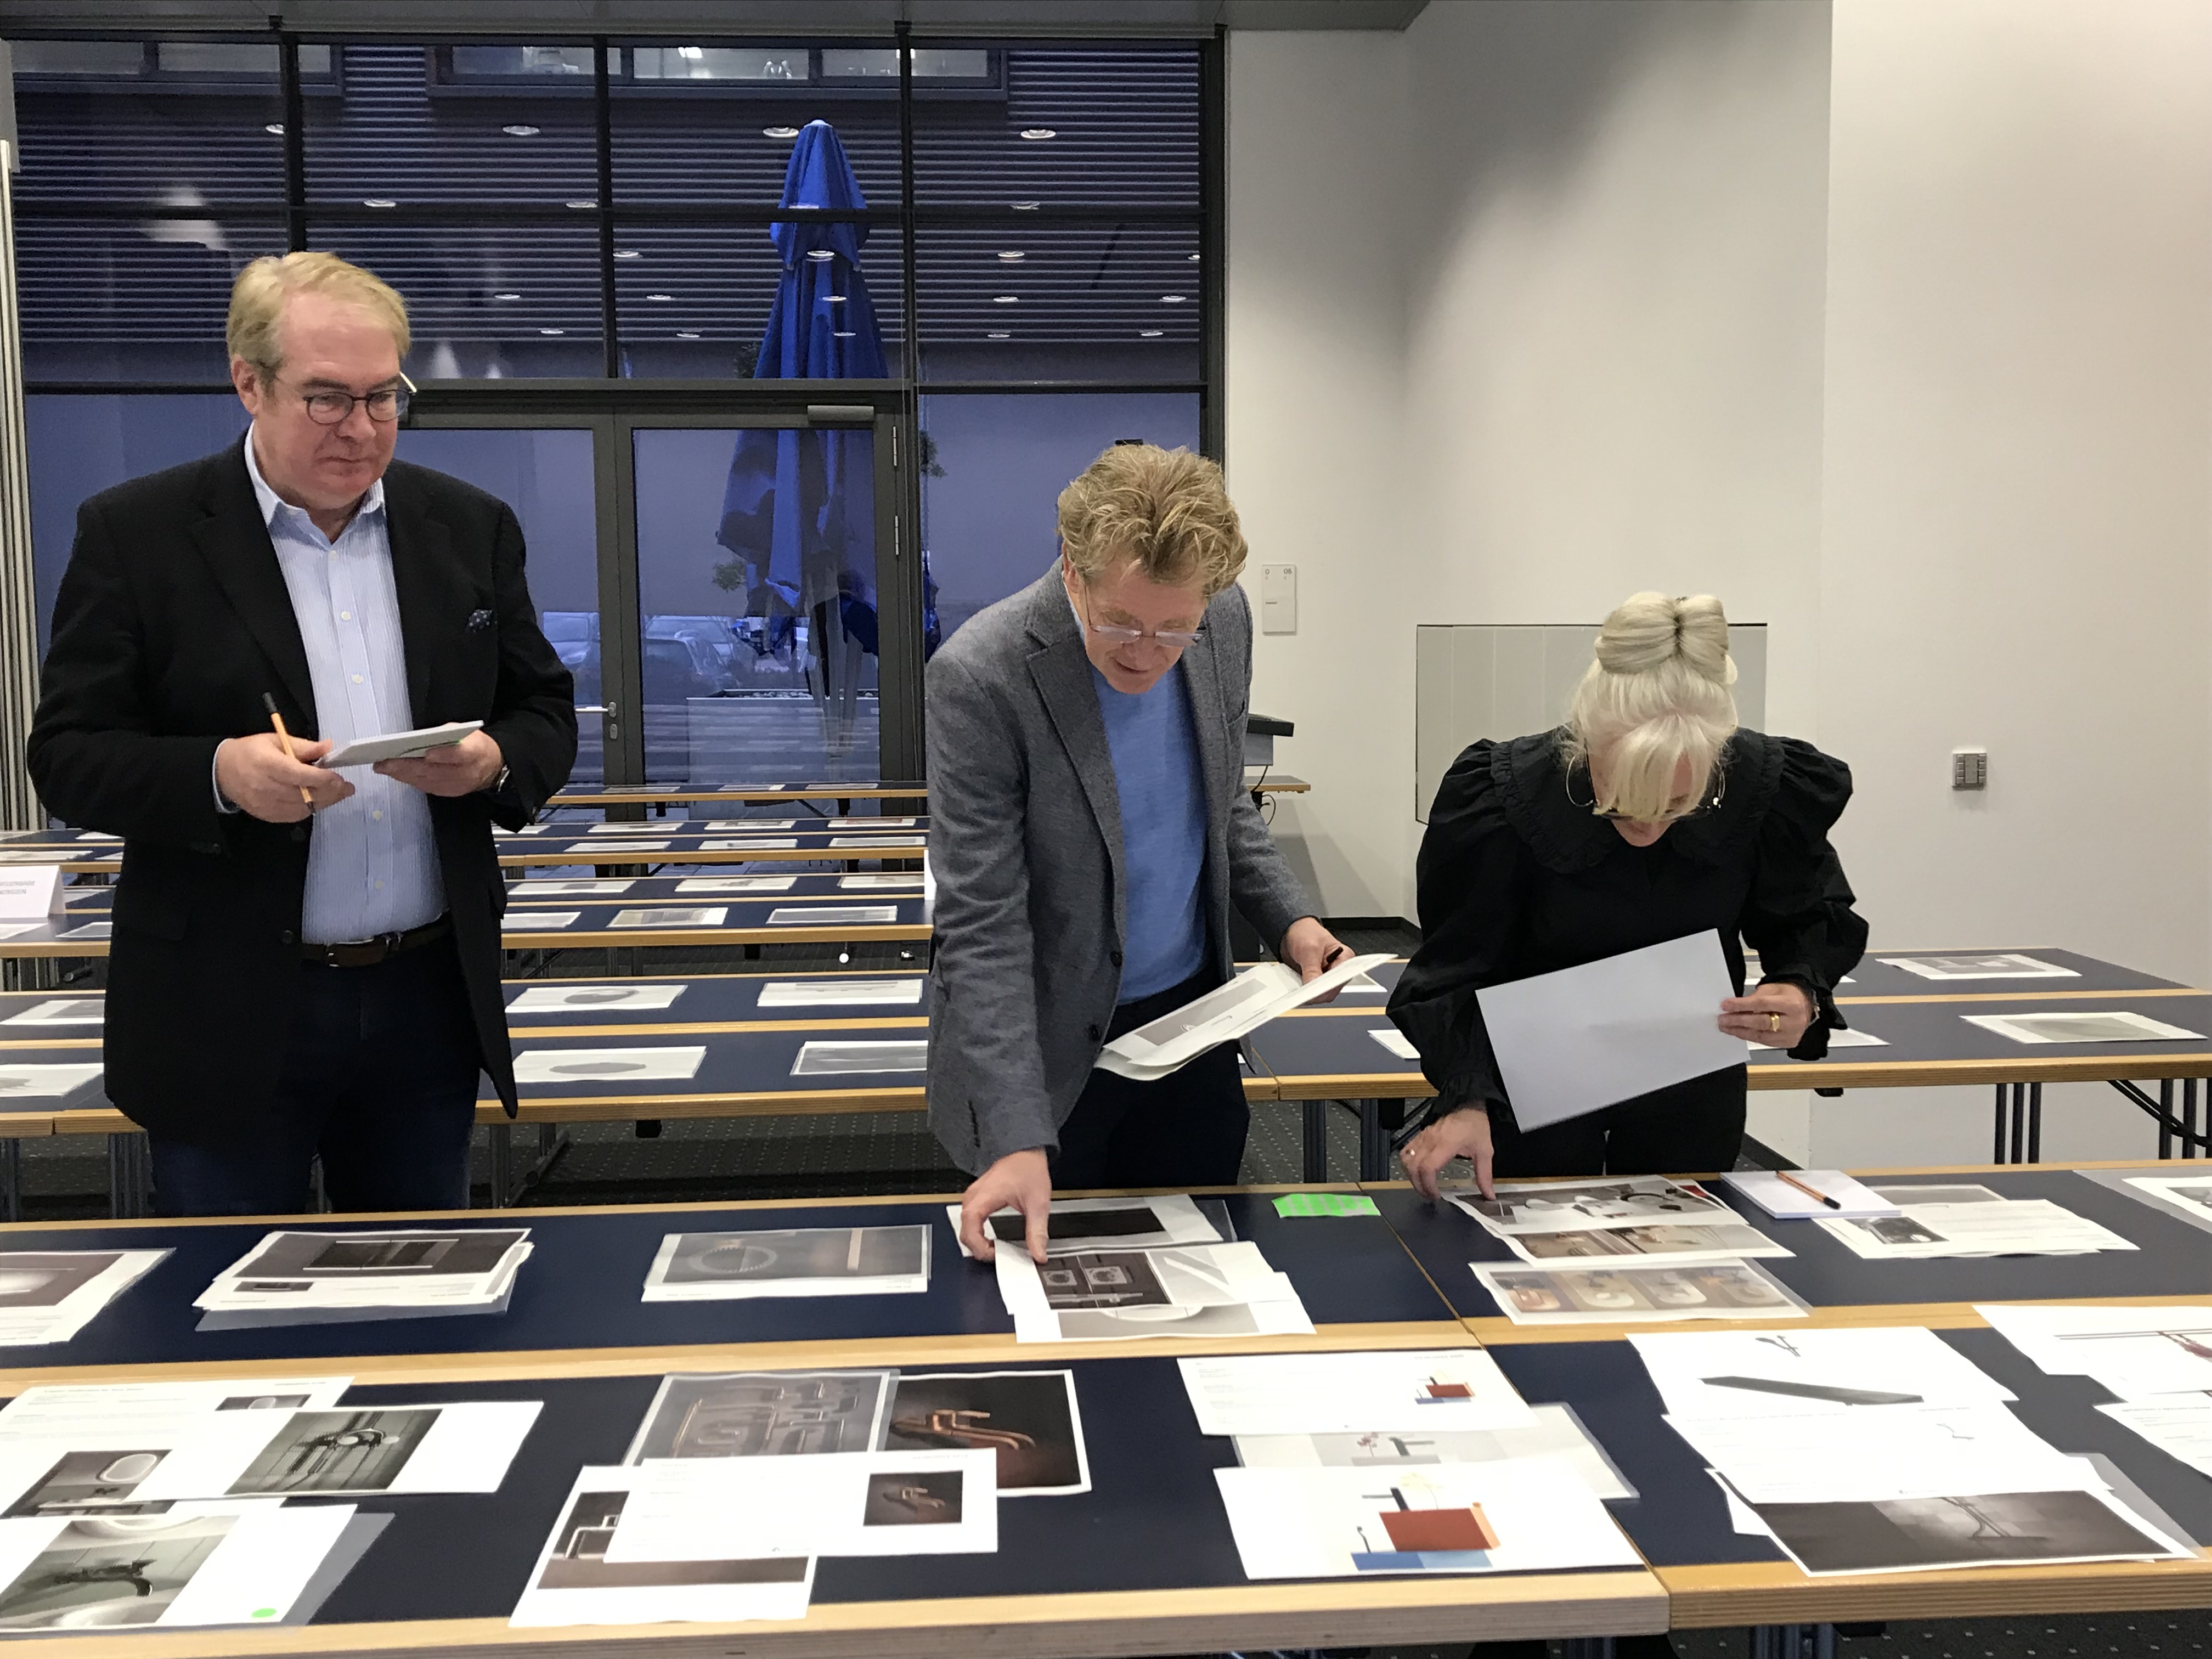 All entries were first considered individually by the jurors and  then discussed and evaluated together. From left to right: Jens Wischmann, Bernhard Heitz and Corinna Kretschmar-Joehnk.